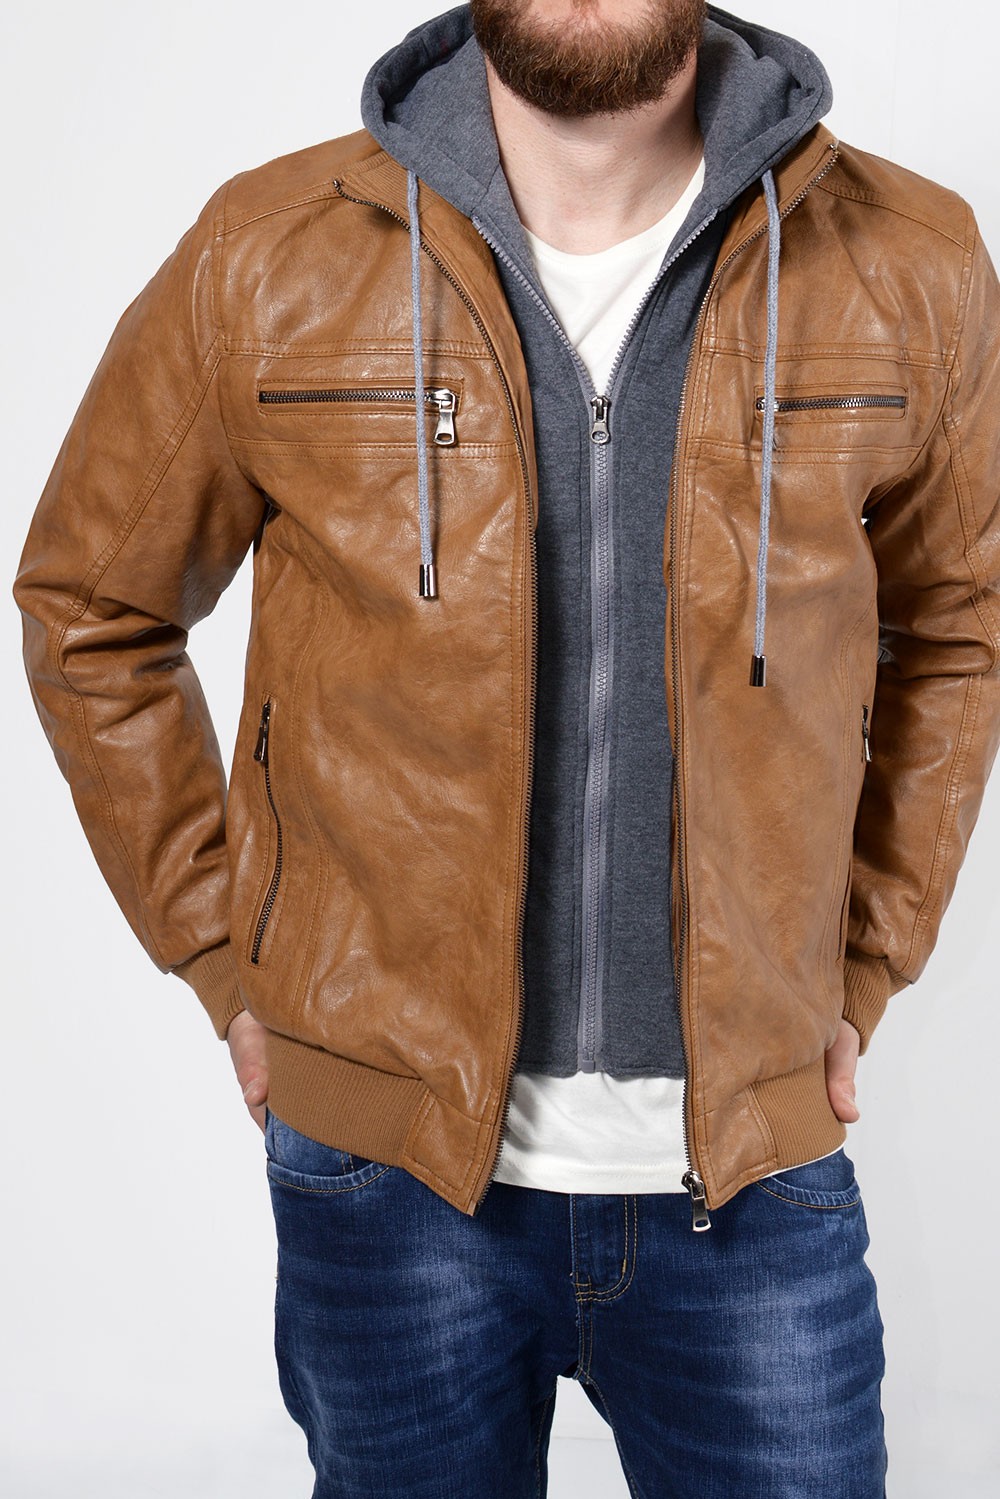 Leather jacket - Brown